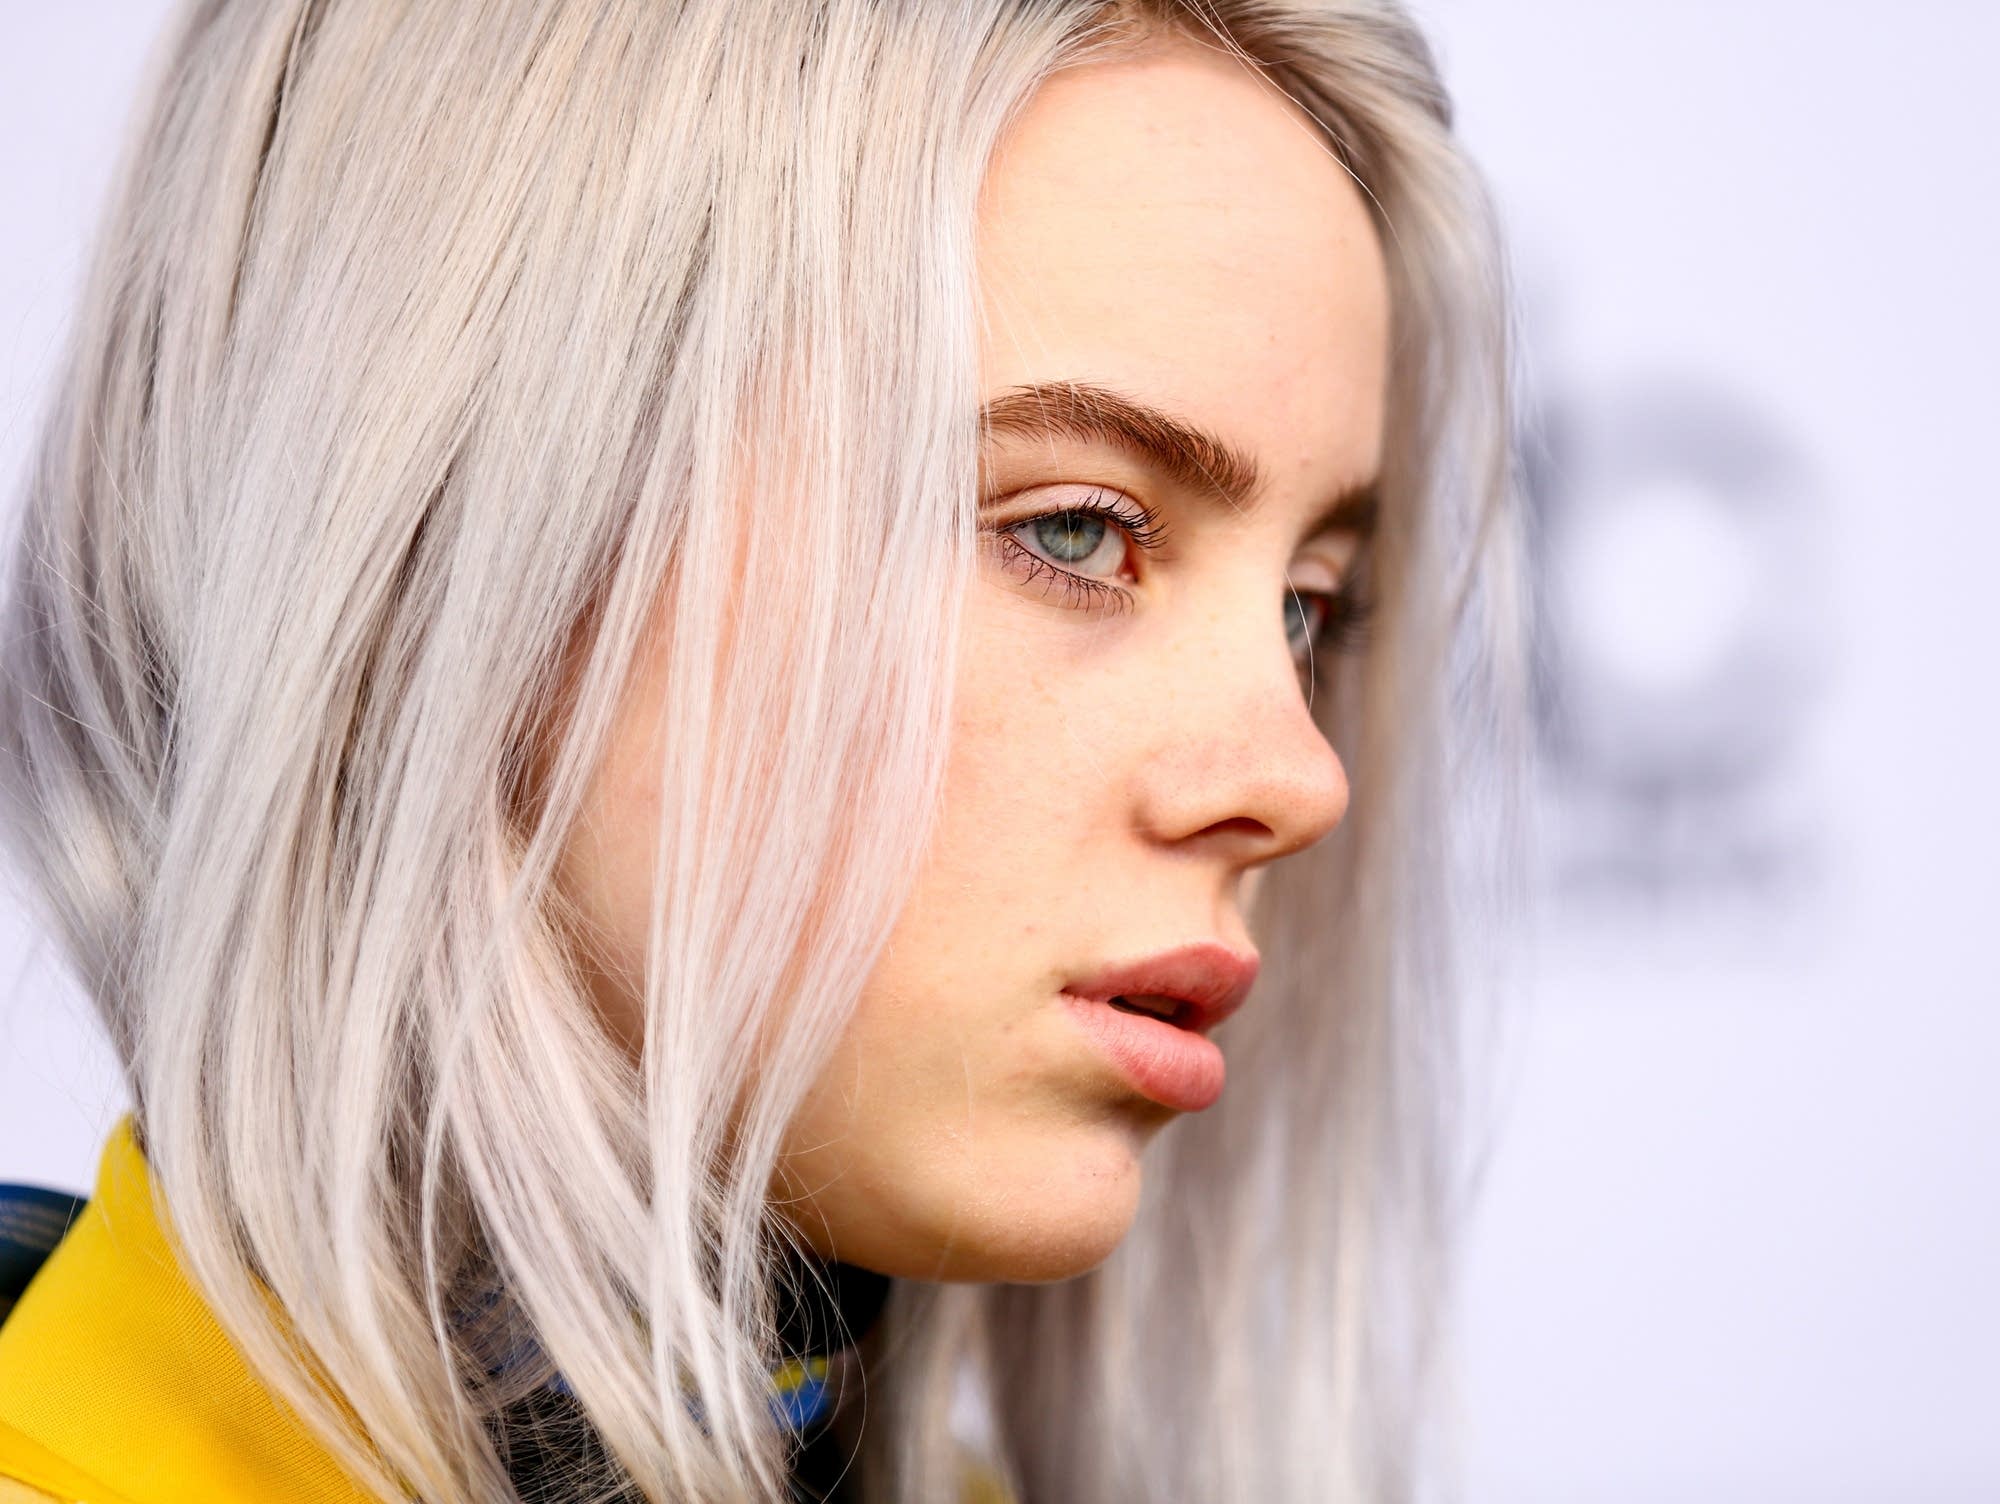 Billie Eilish Opens Up About Her Mental Health And Has Some Great Advice For Fans ...2000 x 1504